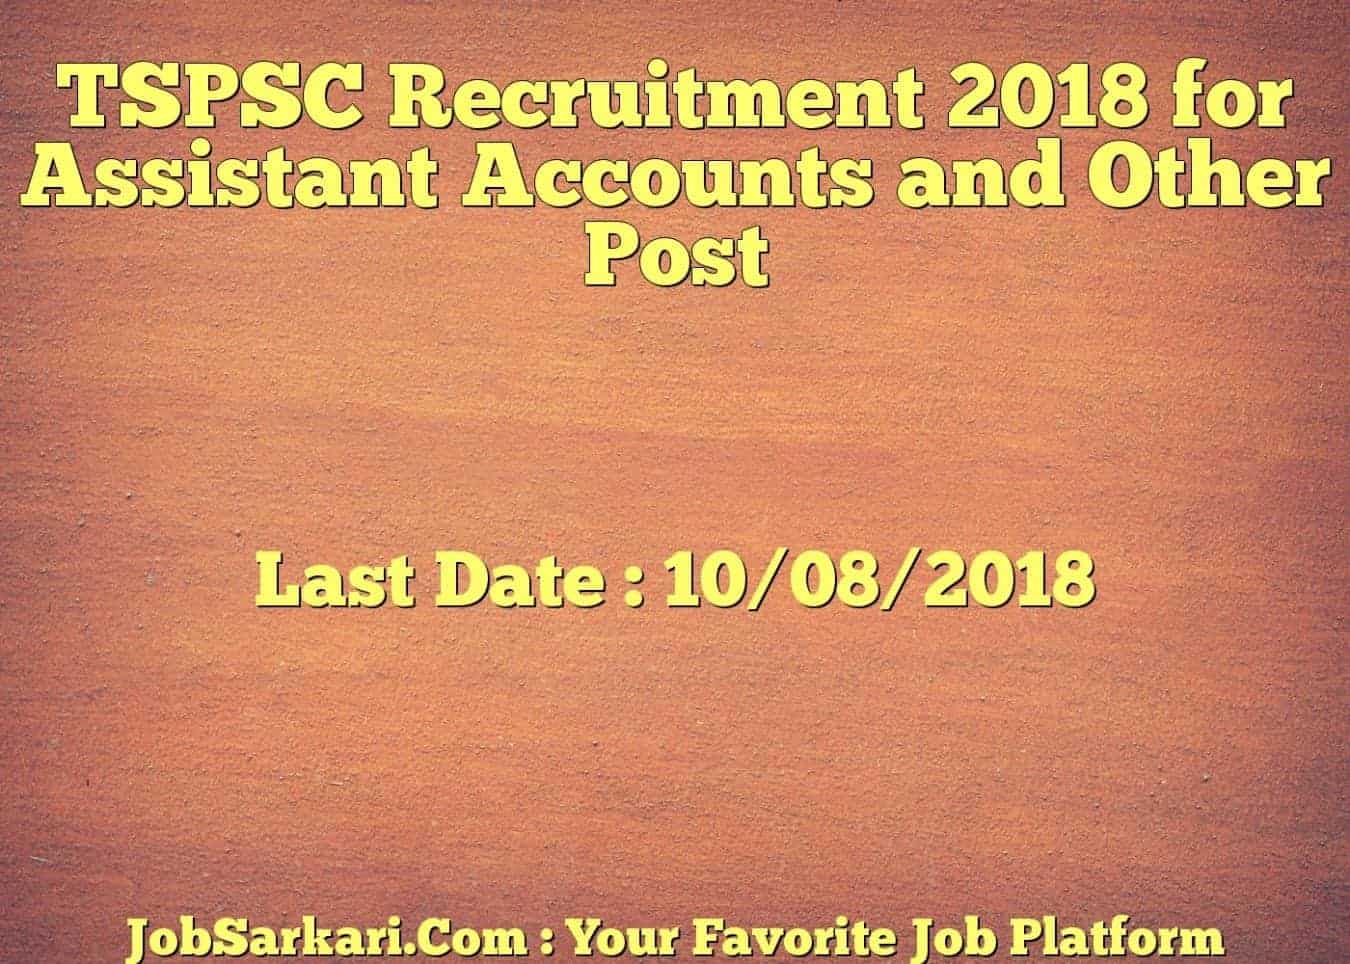 TSPSC Recruitment 2018 for Assistant Accounts and Other Post